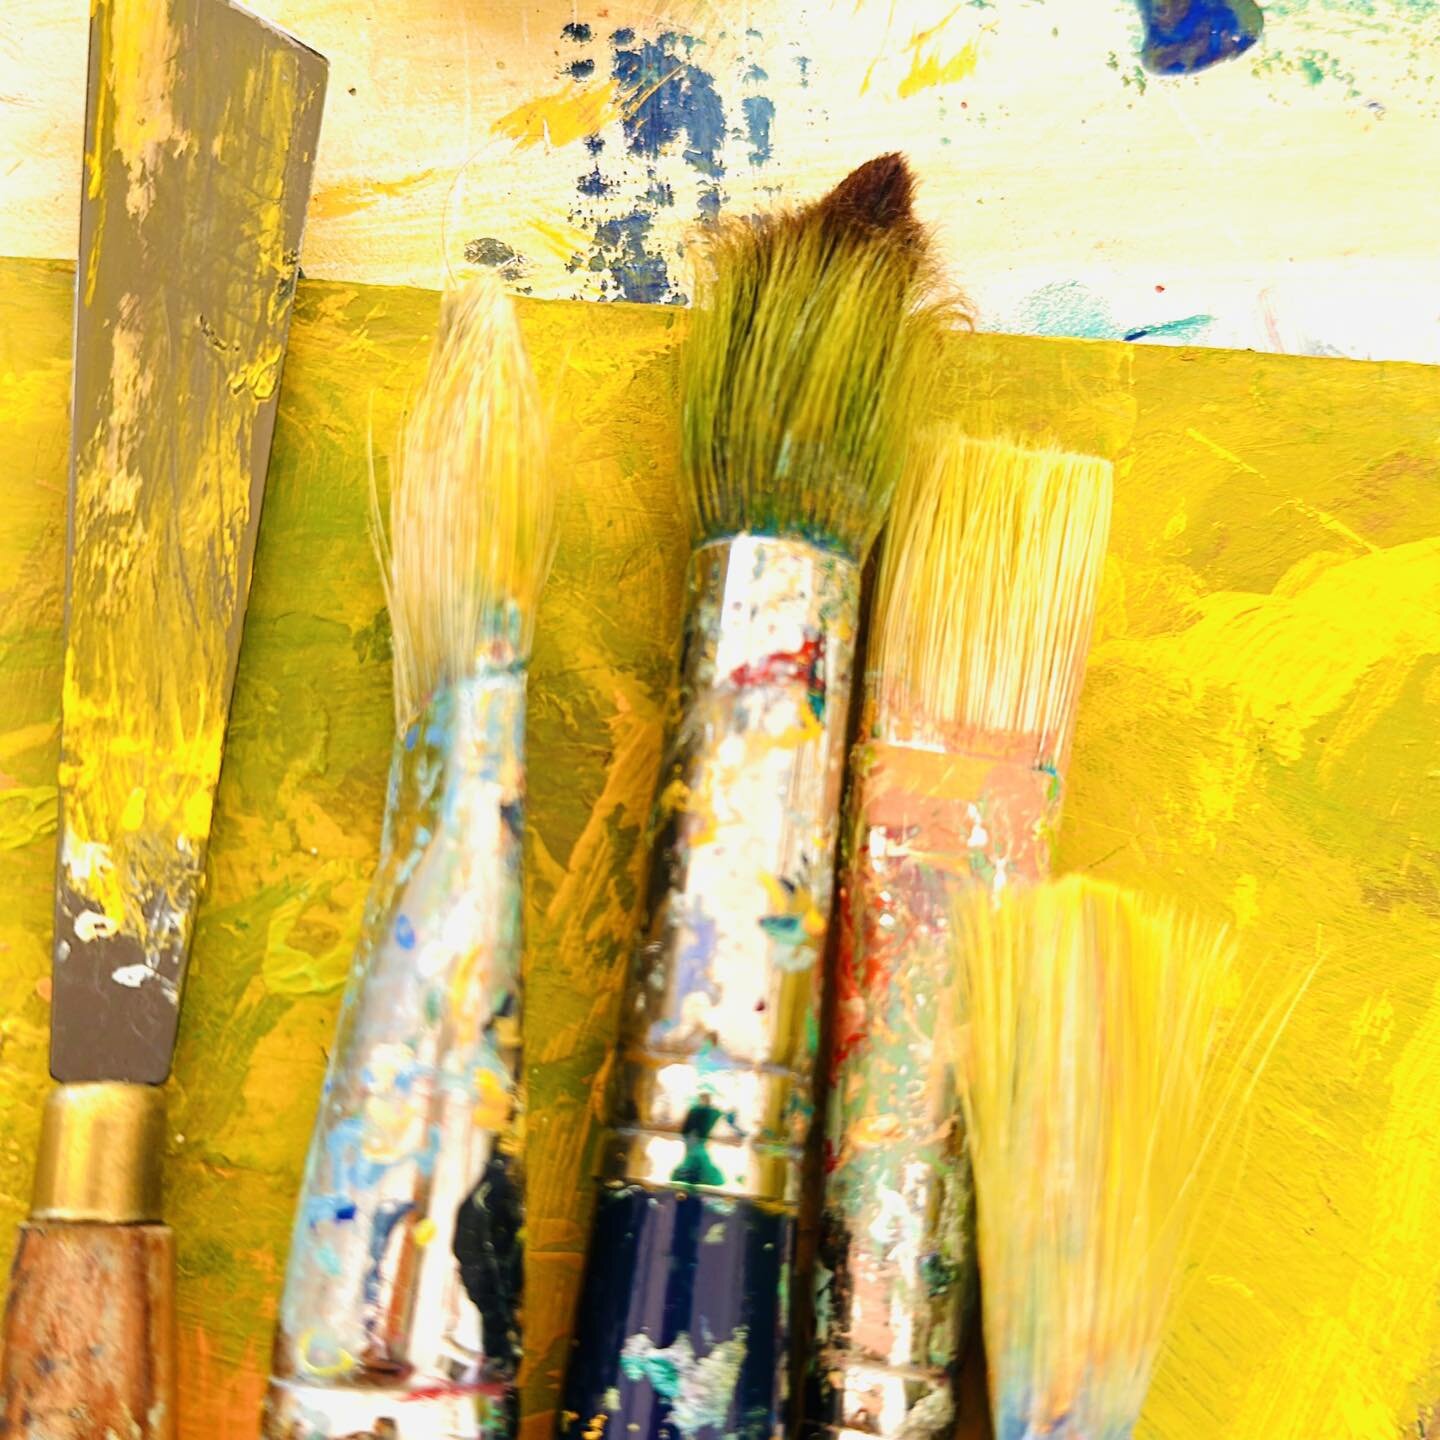 My favourite brushes, thick and lush. 
(Yellow and blue being often my favourite colours lately).

#blue #yellow #favourite #favourite #brush #sydneyartist #balmainartist